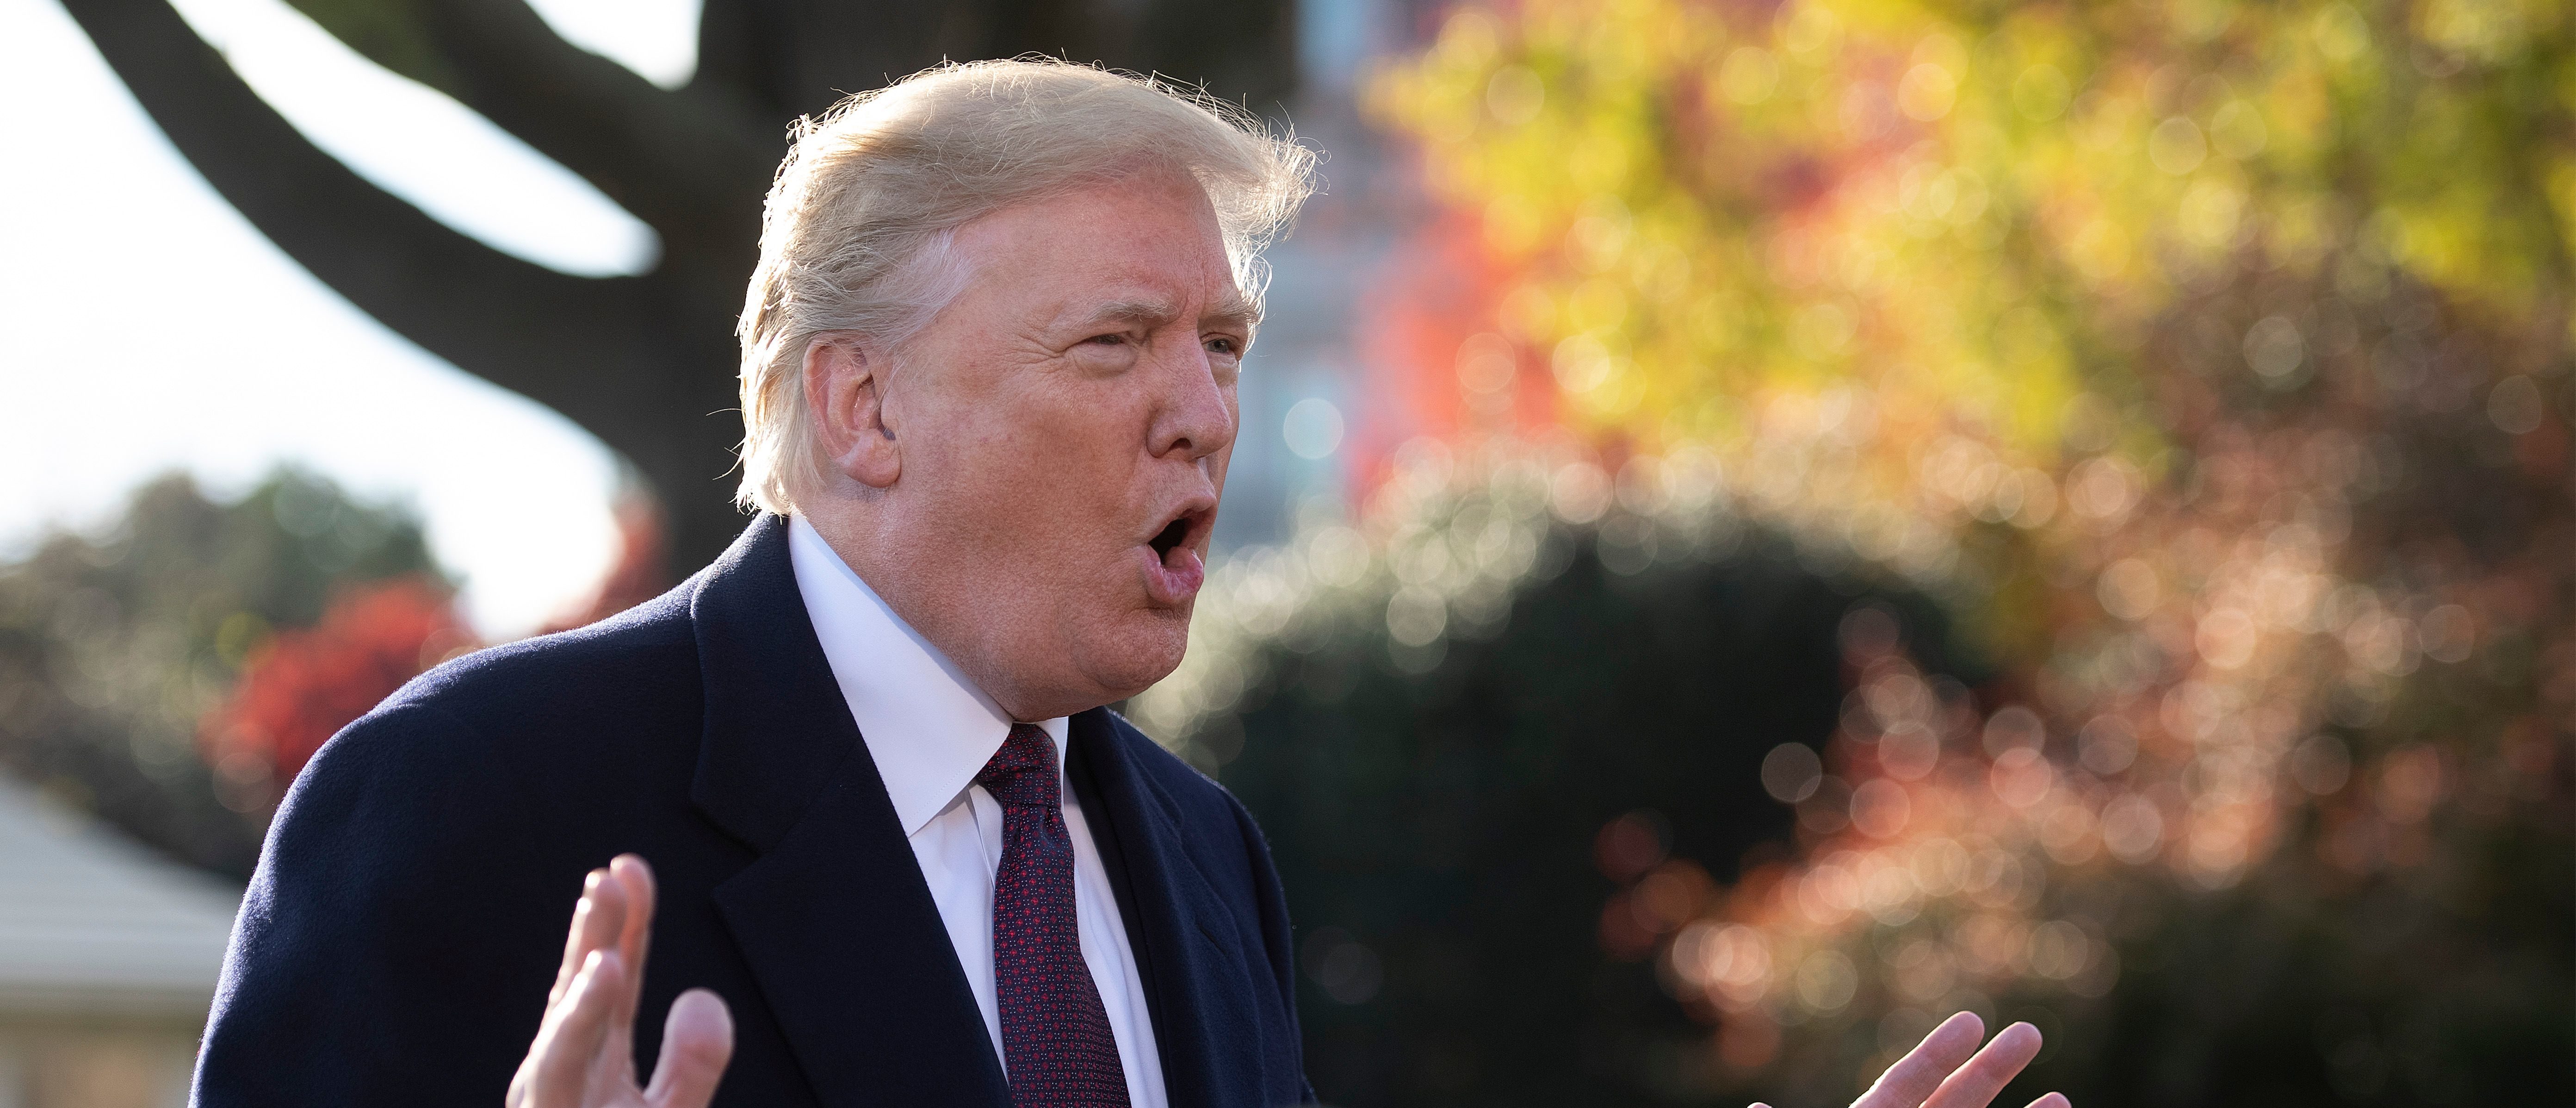 US President Donald Trump speaks to the press as he departs the White House in Washington, DC, on November 20, 2018 JIM WATSON/AFP/Getty Images)